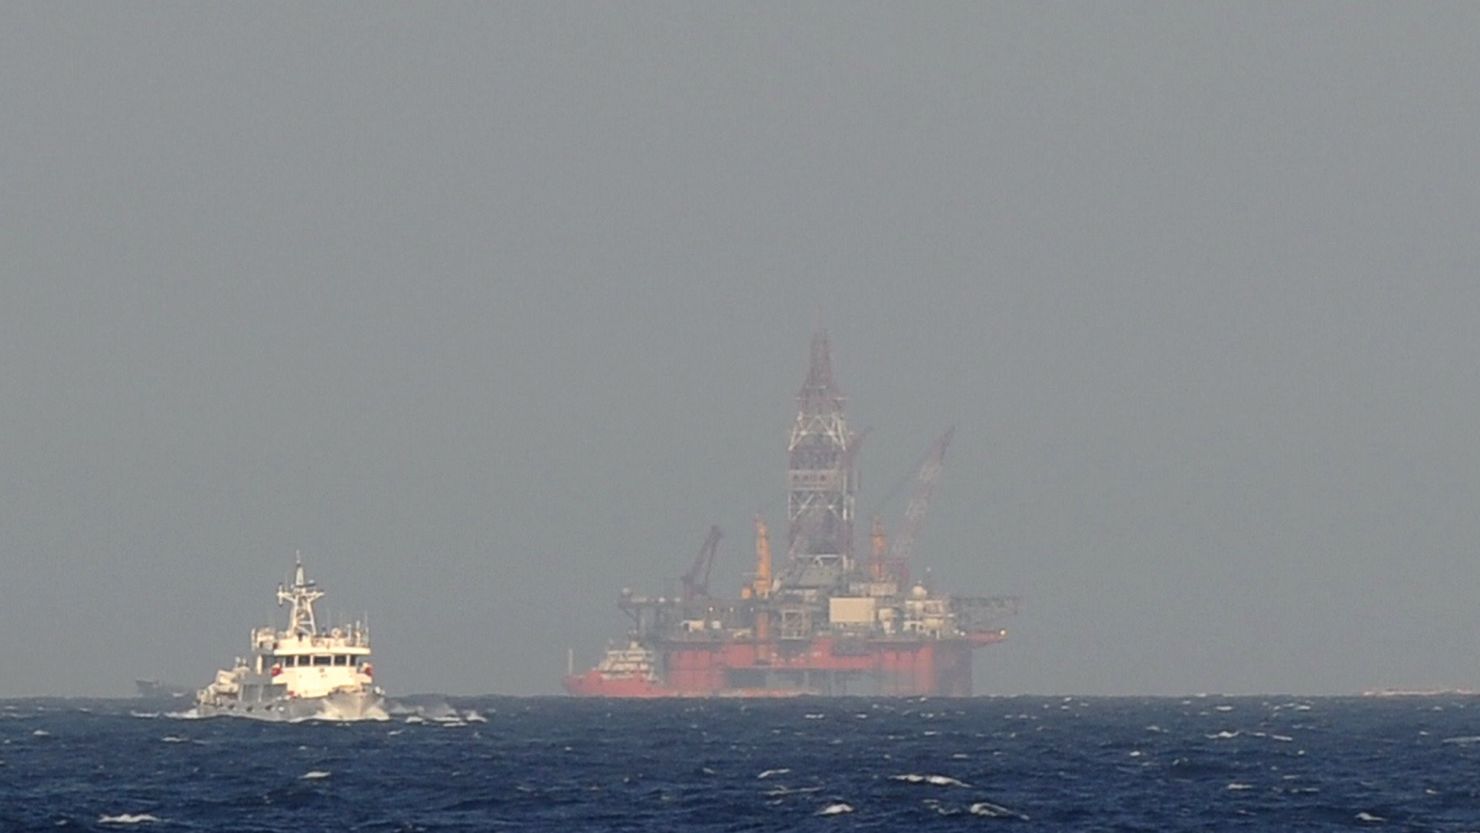 China's oil drilling rig in disputed waters in the South China Sea.